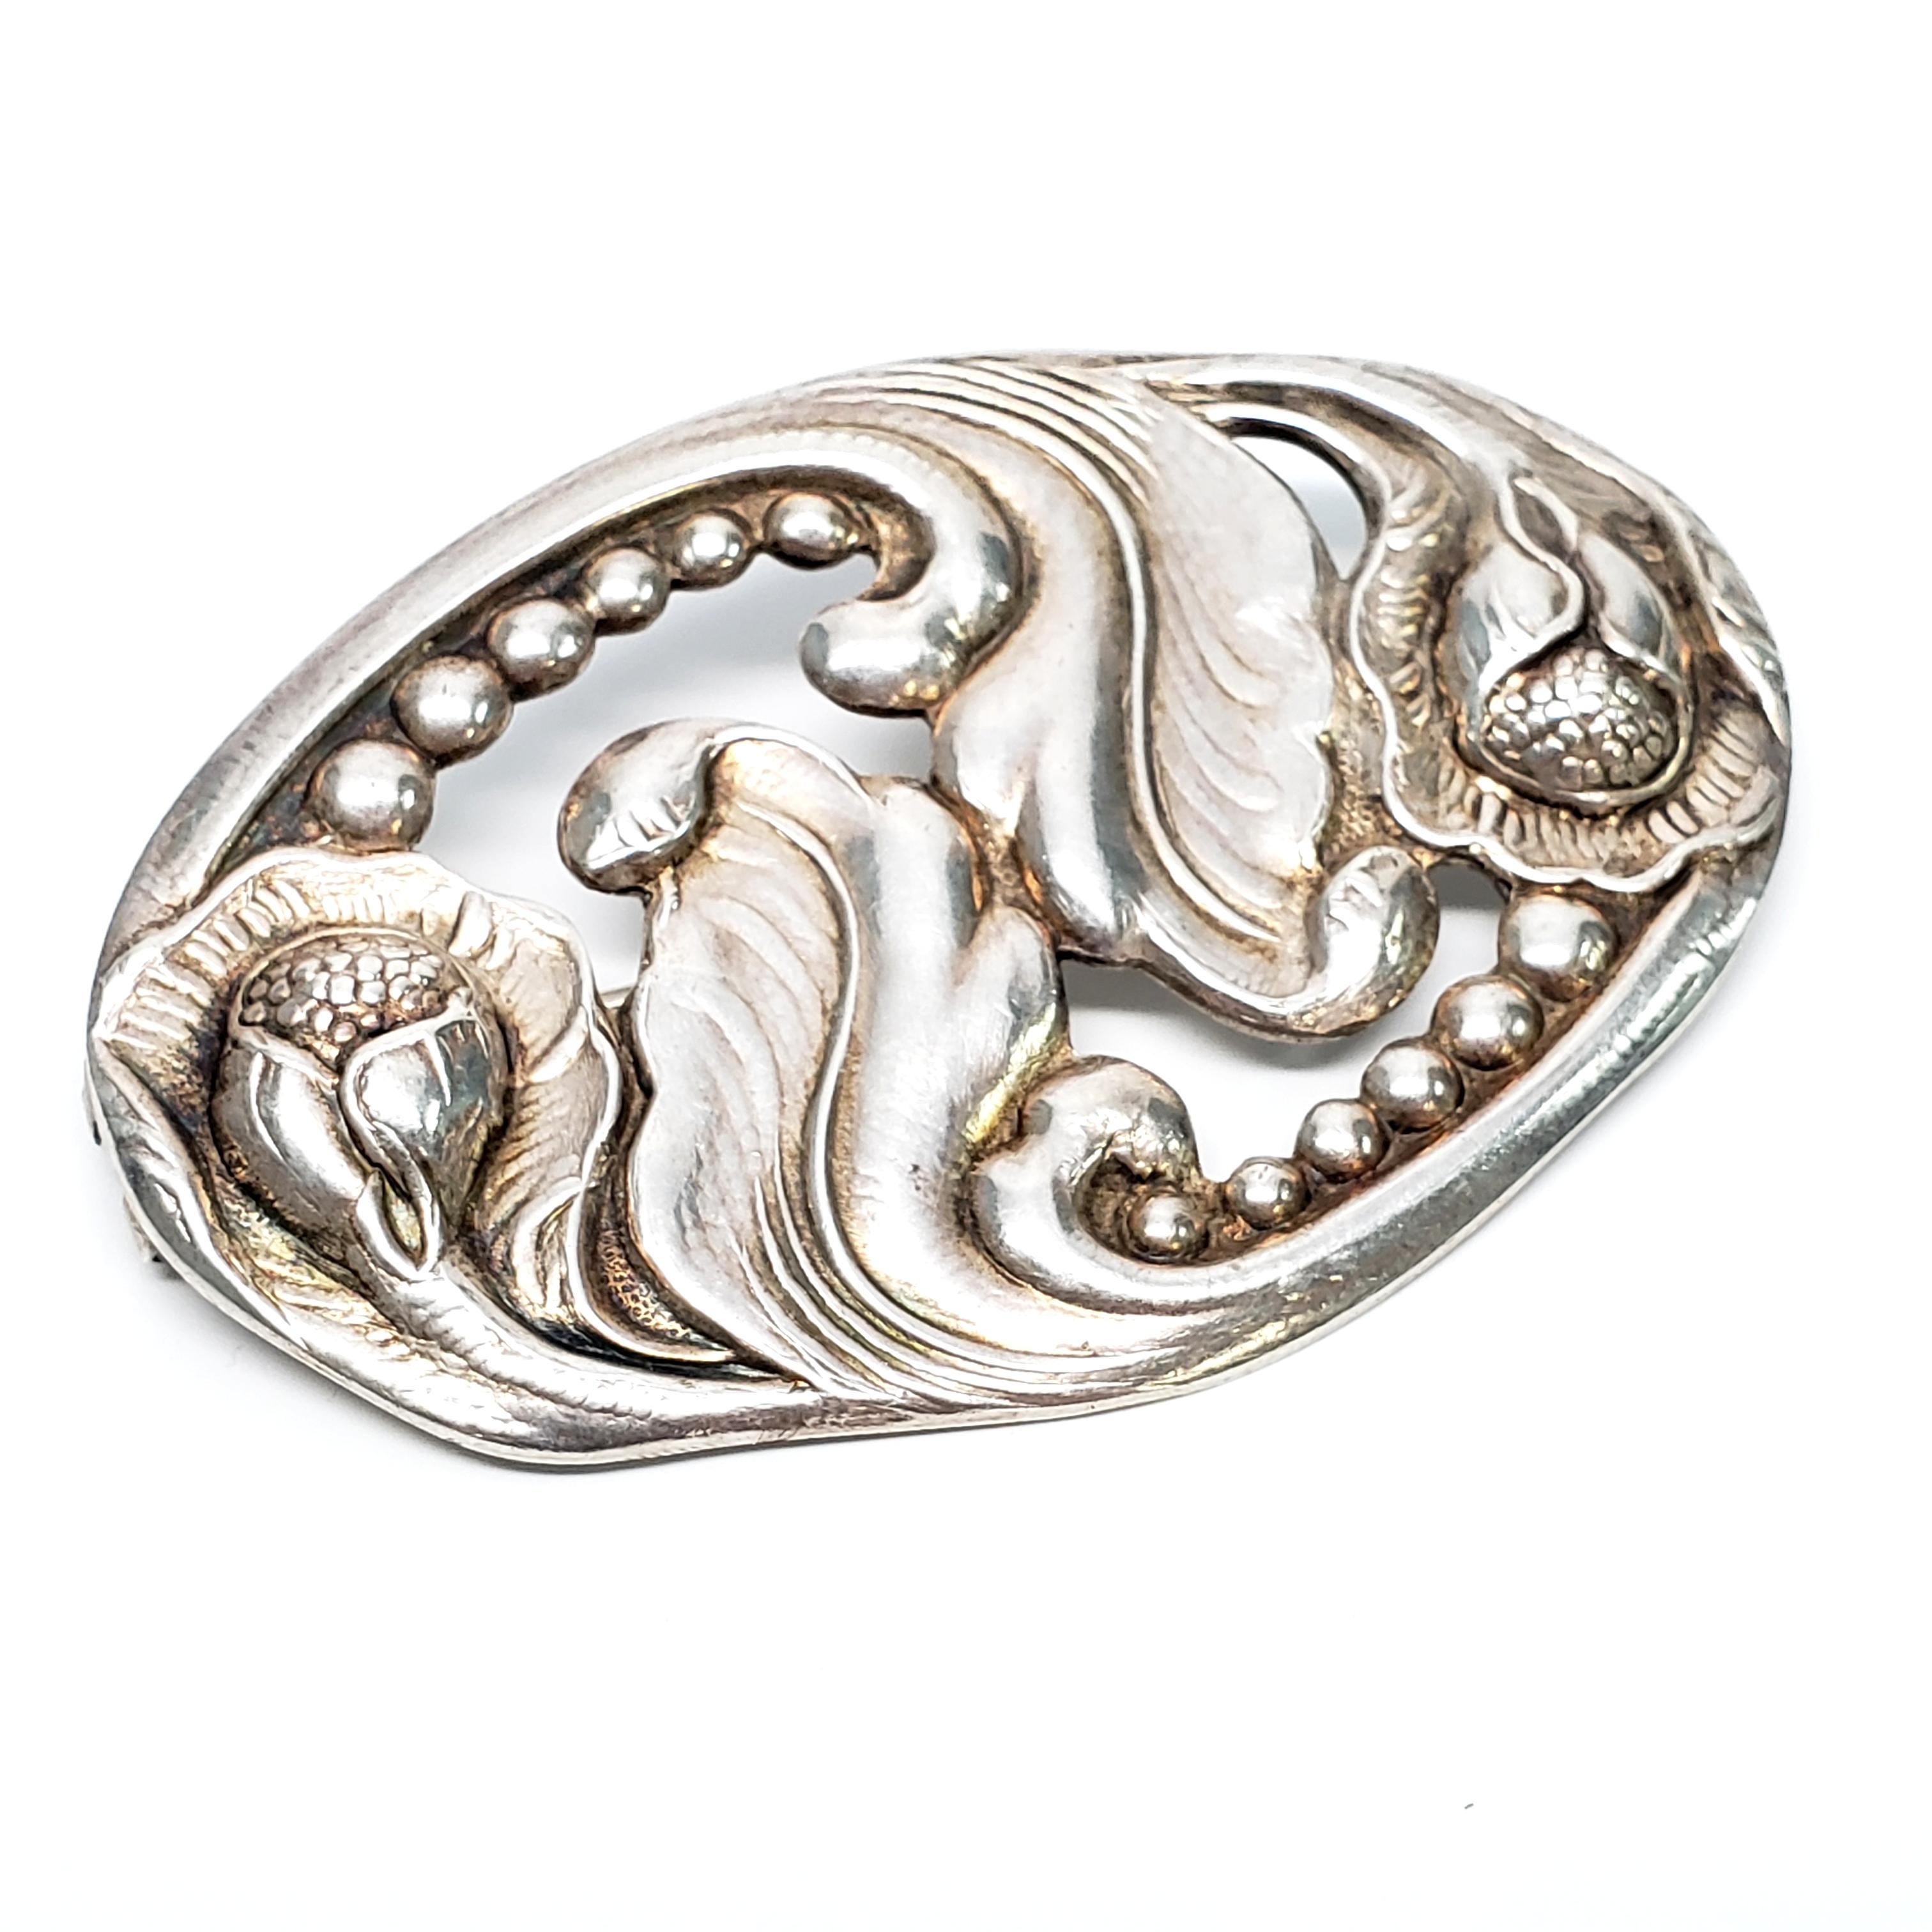 Vintage sterling silver floral oval pin/brooch by Carl Poul Petersen.

Carl Poul Petersen apprenticed under Georg Jensen from 1908-1913. The pin features a leafy floral motif with beaded accents.

Measures 2 1/2